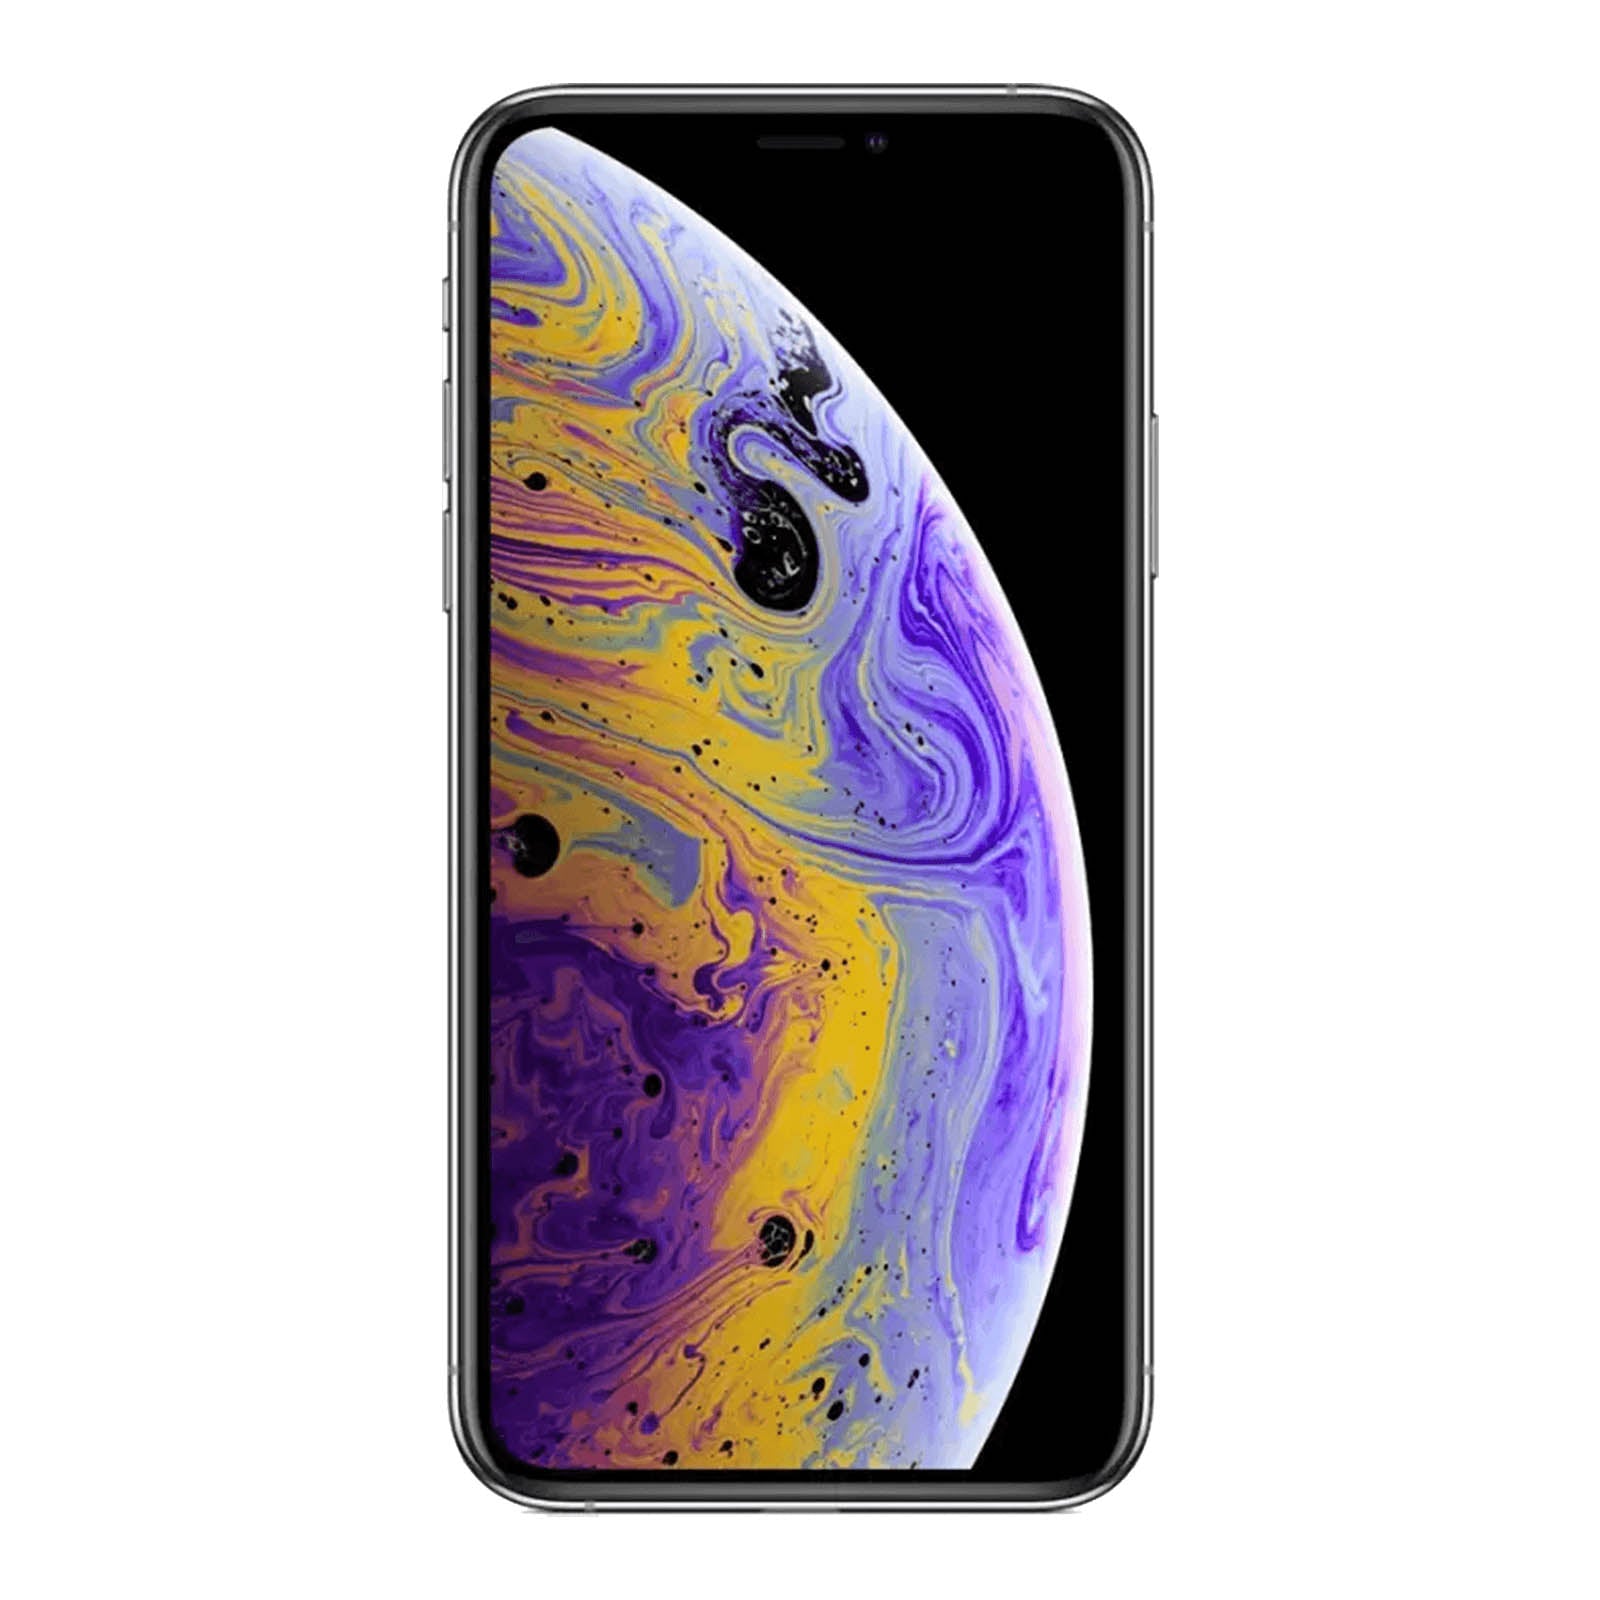 Apple iPhone XS 64GB Silver Very Good - AT&T